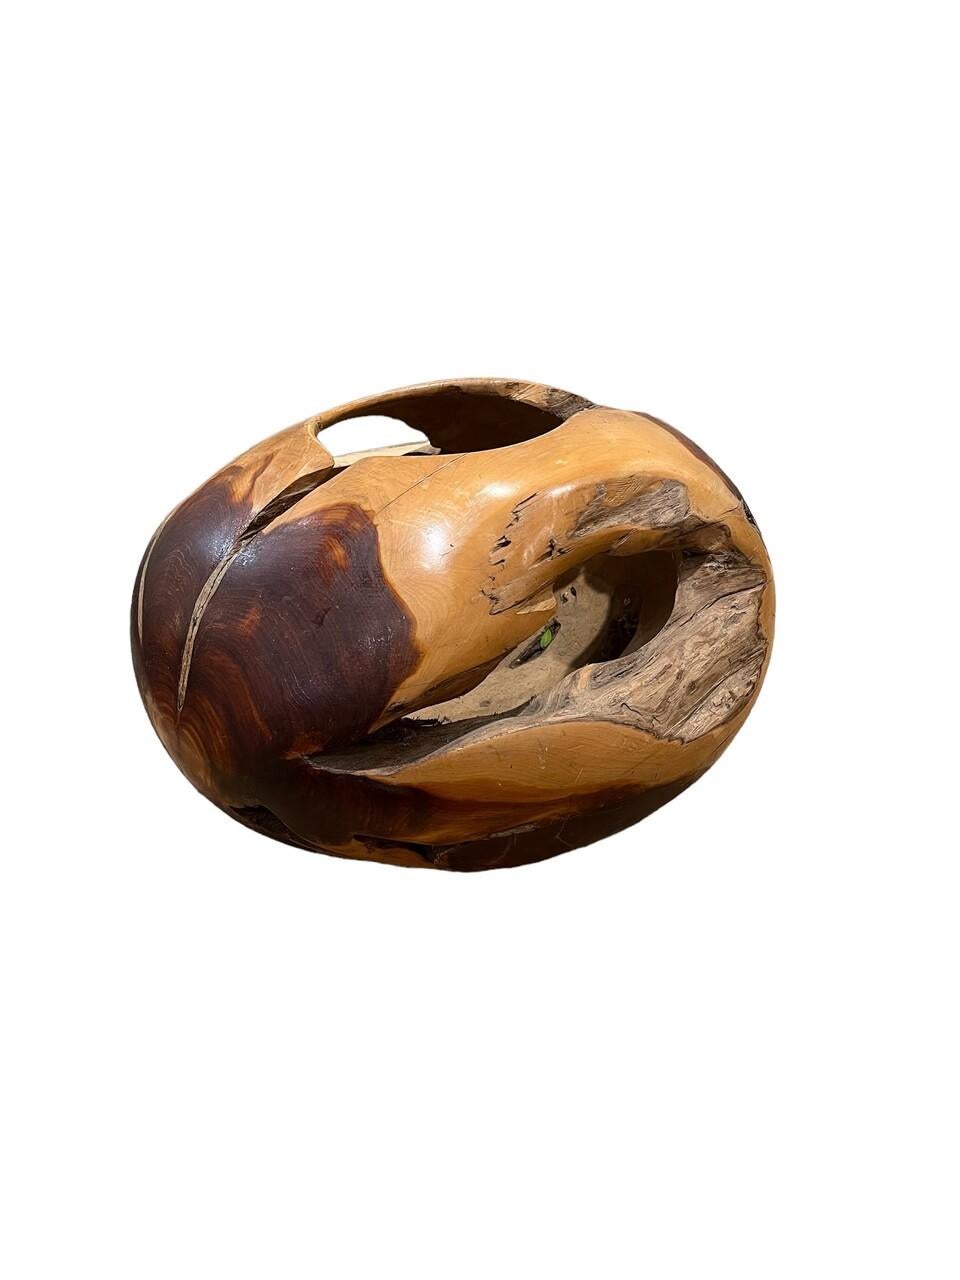 Organic Modern Large Hand Carved and Polished Burl Root Sphere Sculpture For Sale